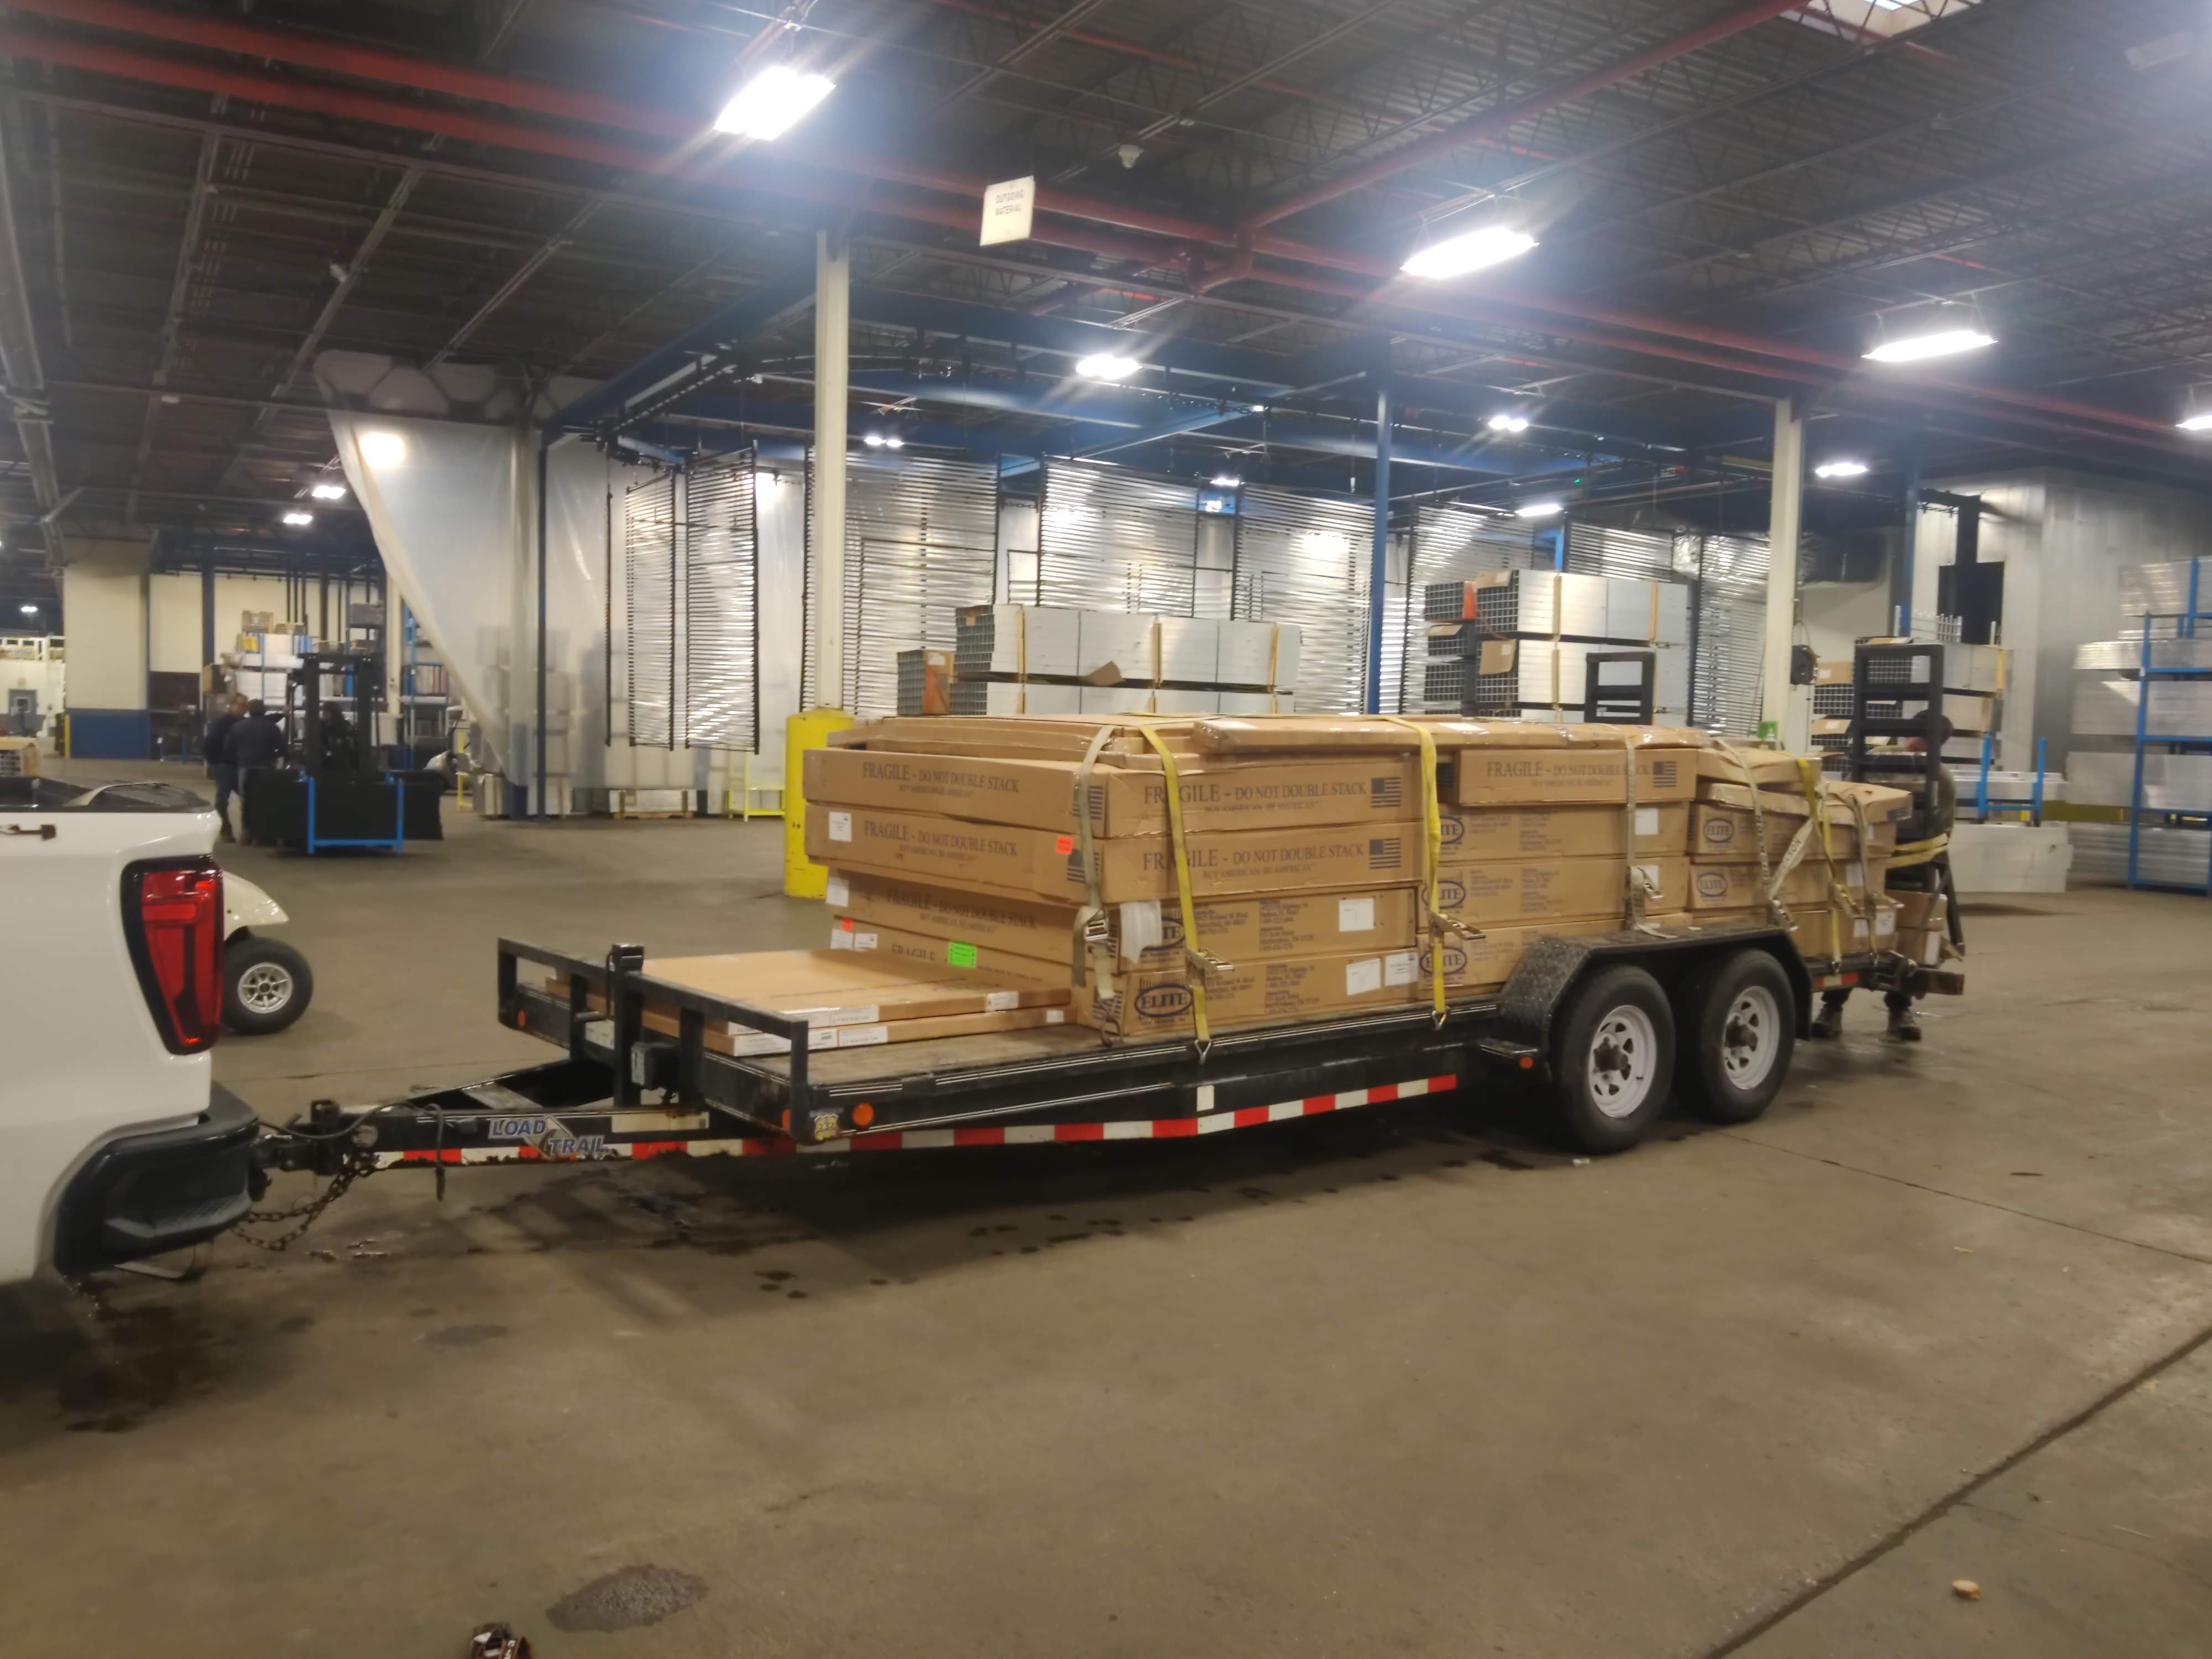 One of our competitive advantages is our proximity to the Windsor-Detroit border and the ability to source product on the US side. Here we are filling our trailer up with orders at the Elite Fence Products manufacturing headquarters in Chesterfield Michigan.